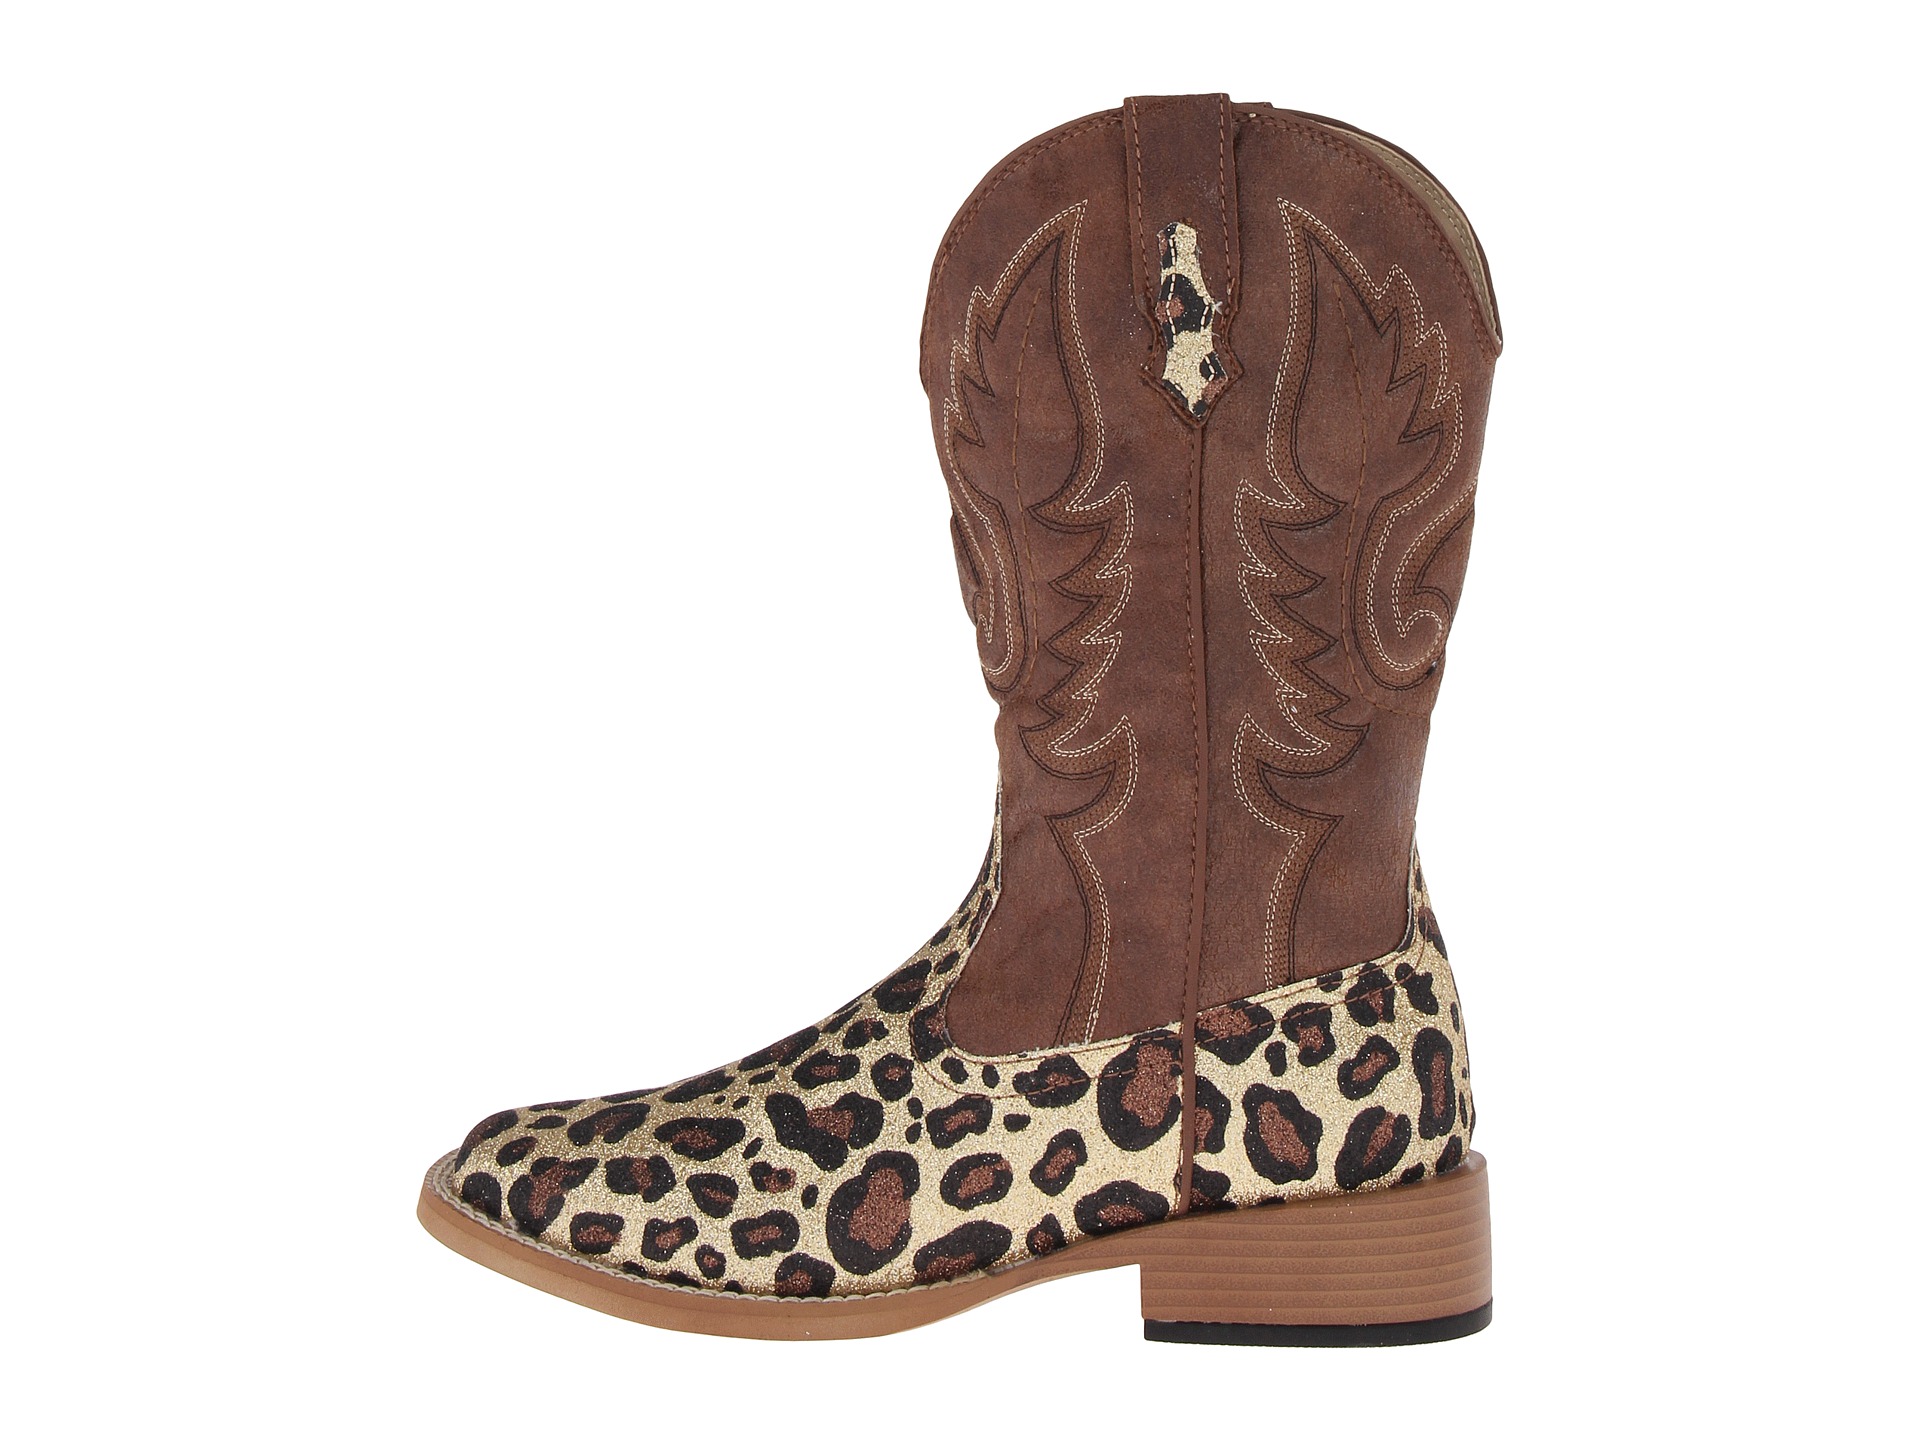 Roper Leopard Glitter Boot Brown, Shoes | Shipped Free at Zappos